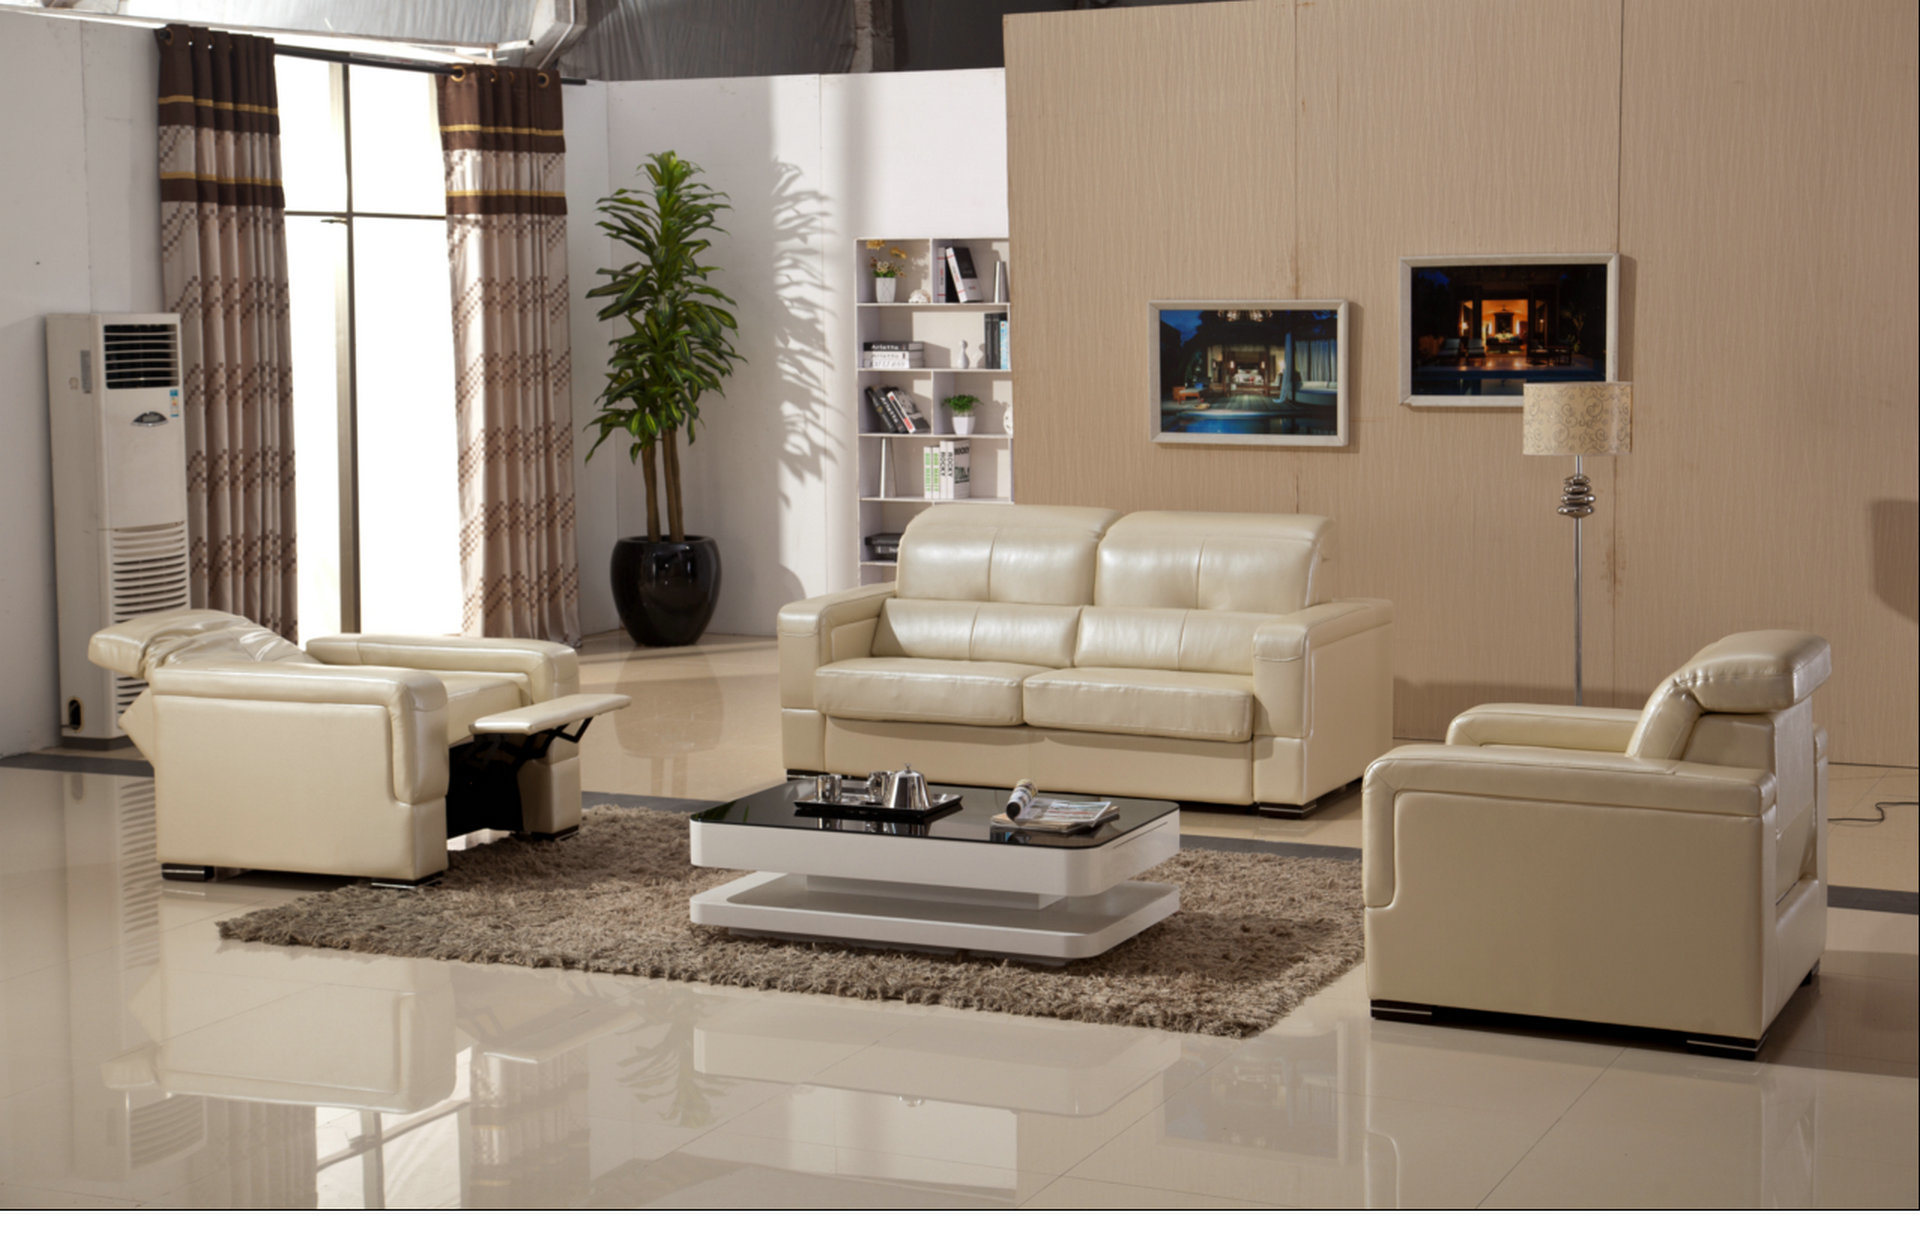 Hot Sell Recliner Leather Sofa for Living Room Furniture (Y981)